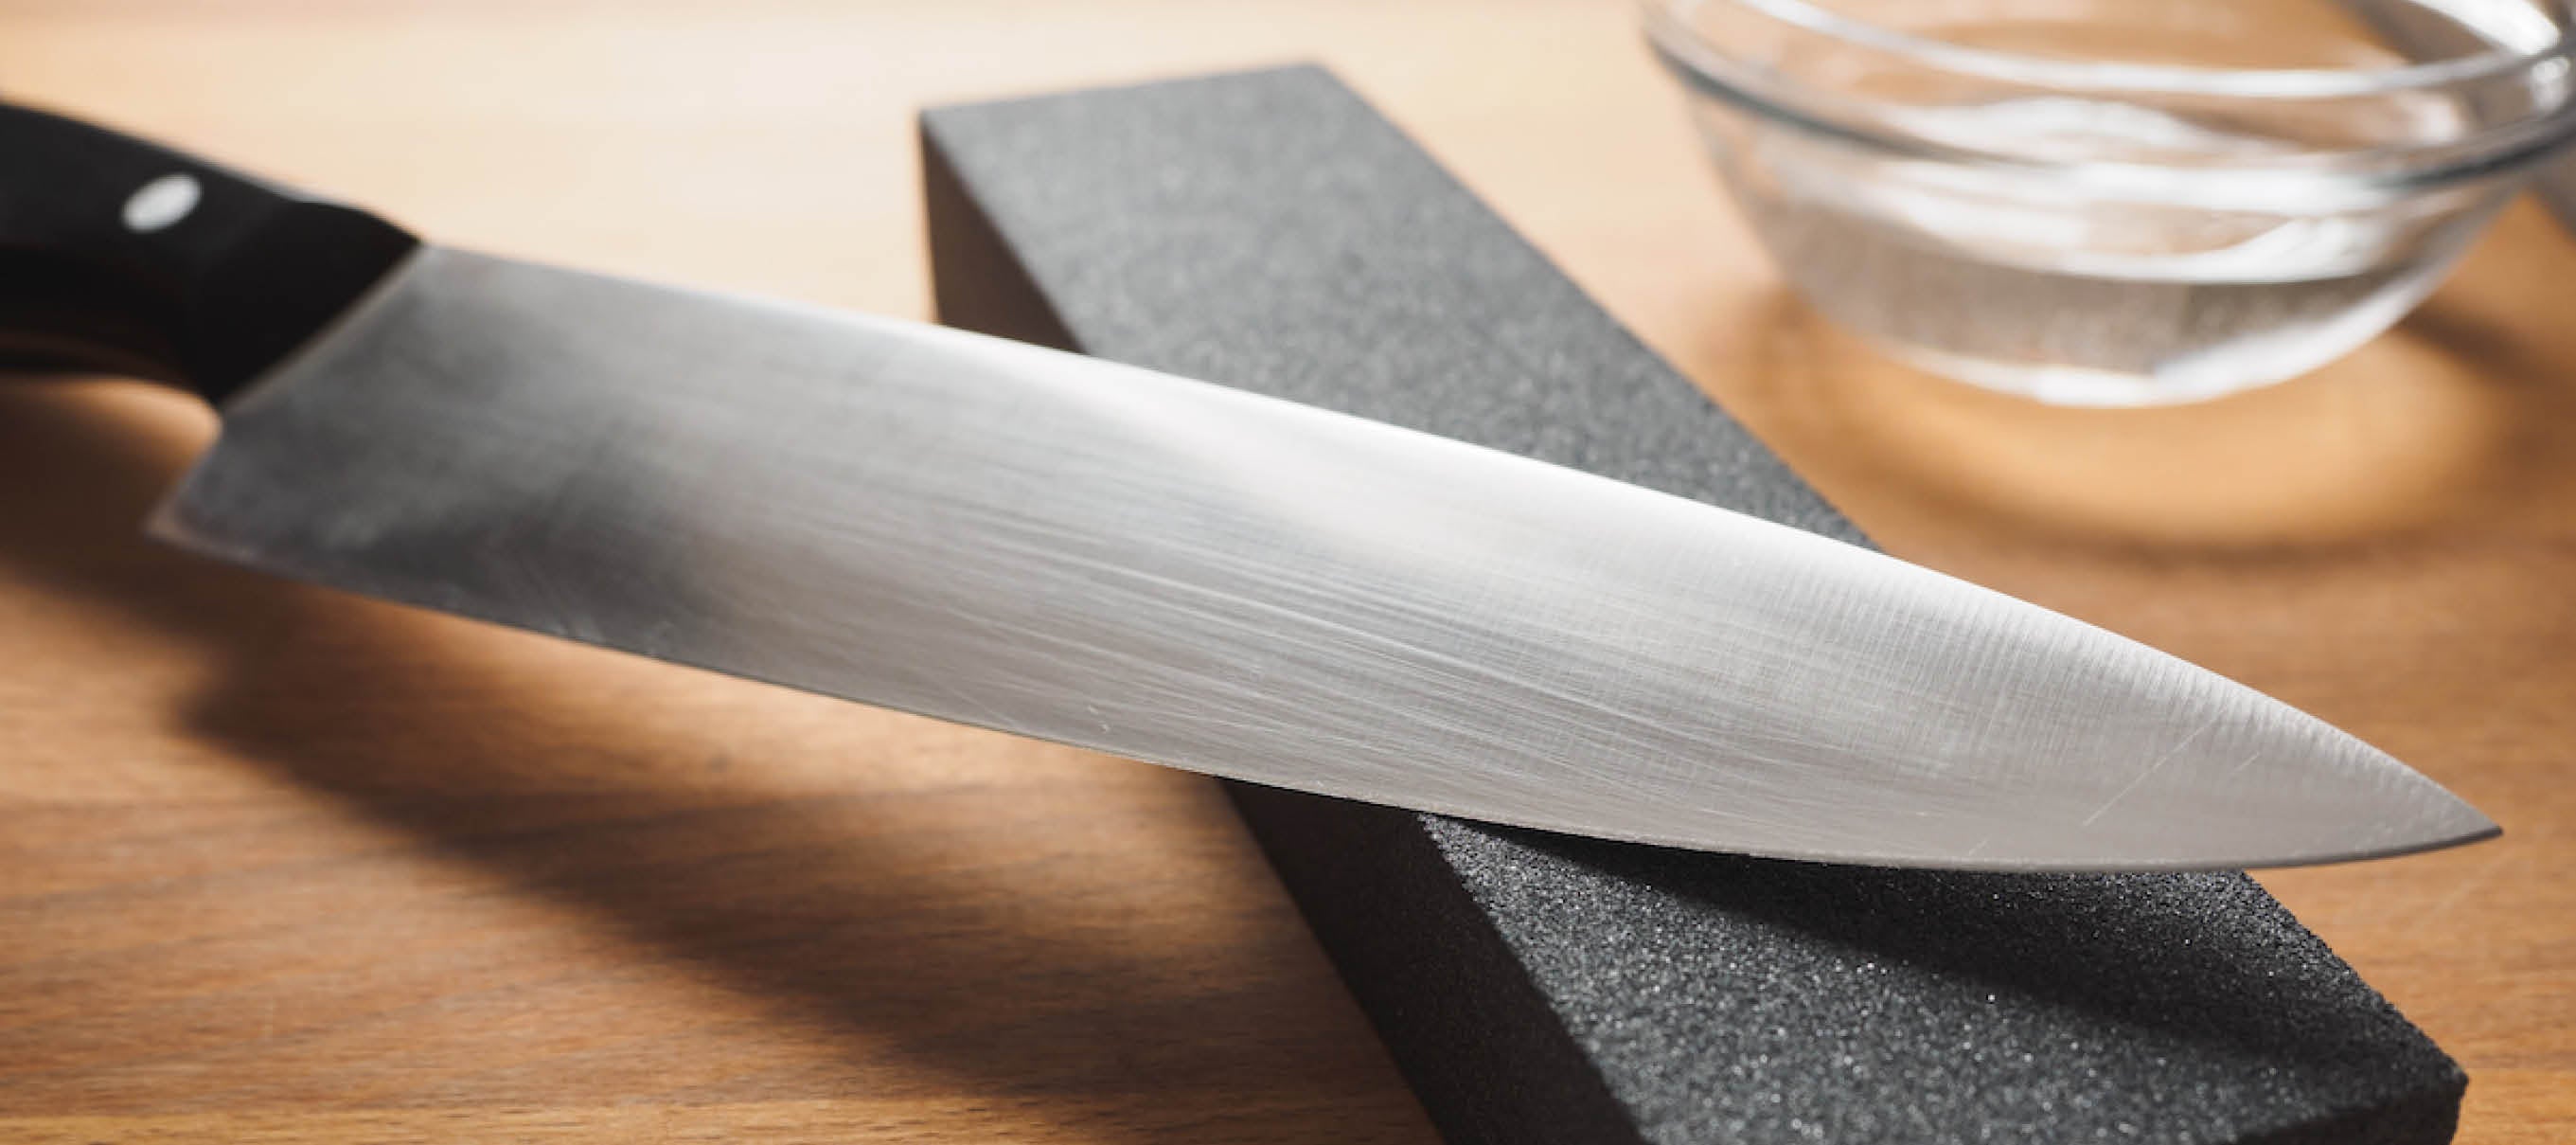 How to Care for Your Brand New Japanese Knife (Or Any Other Knife